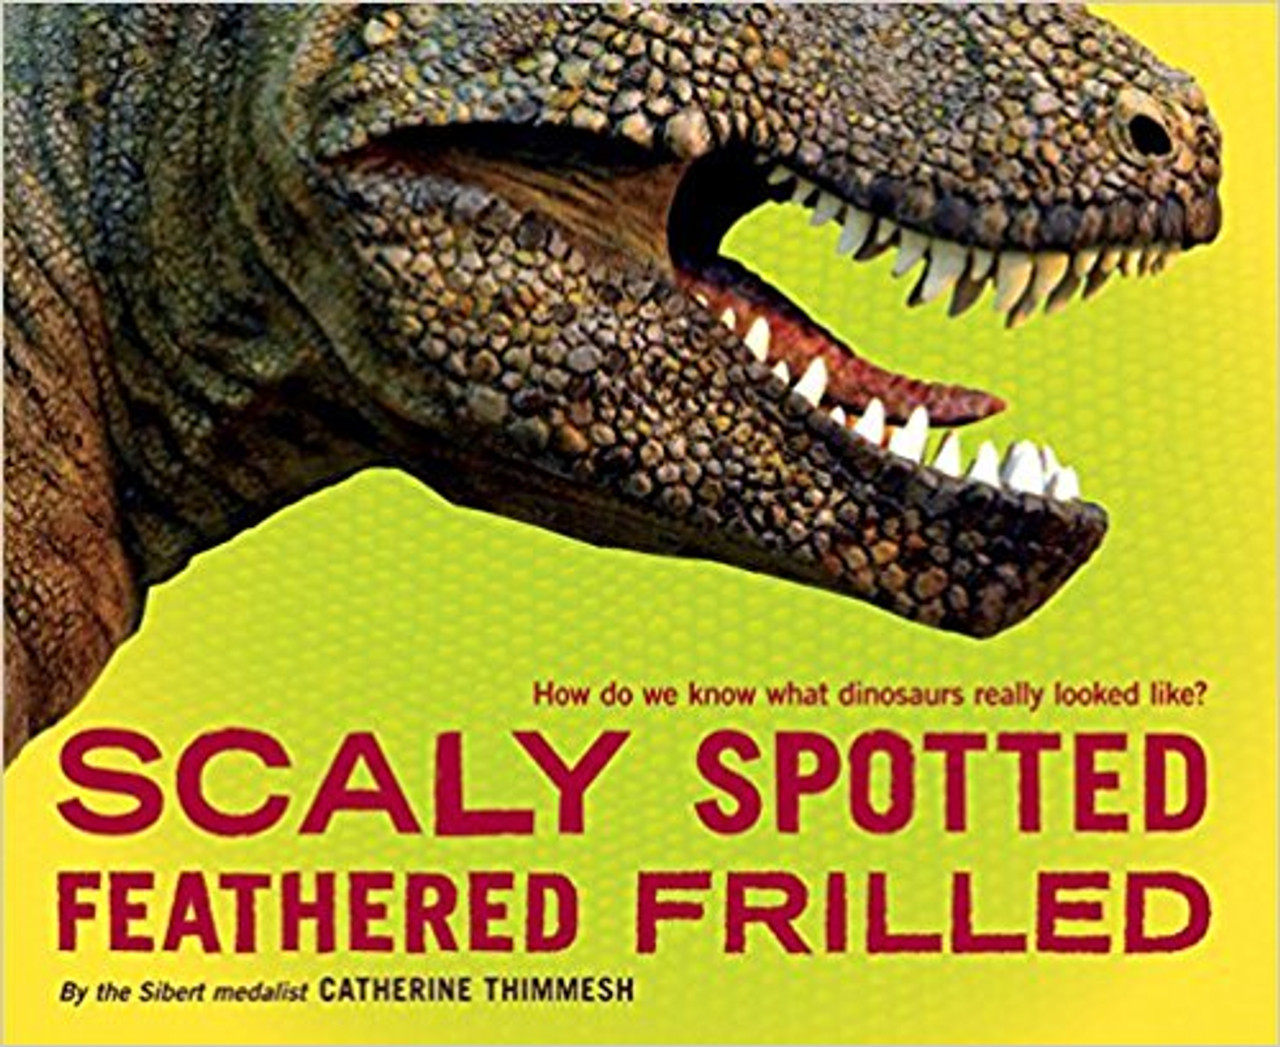 Scaly Spotted Feathered Frilled: How Do We Know What Dinosaurs Really Looked Like? by Catherine Thimmesh